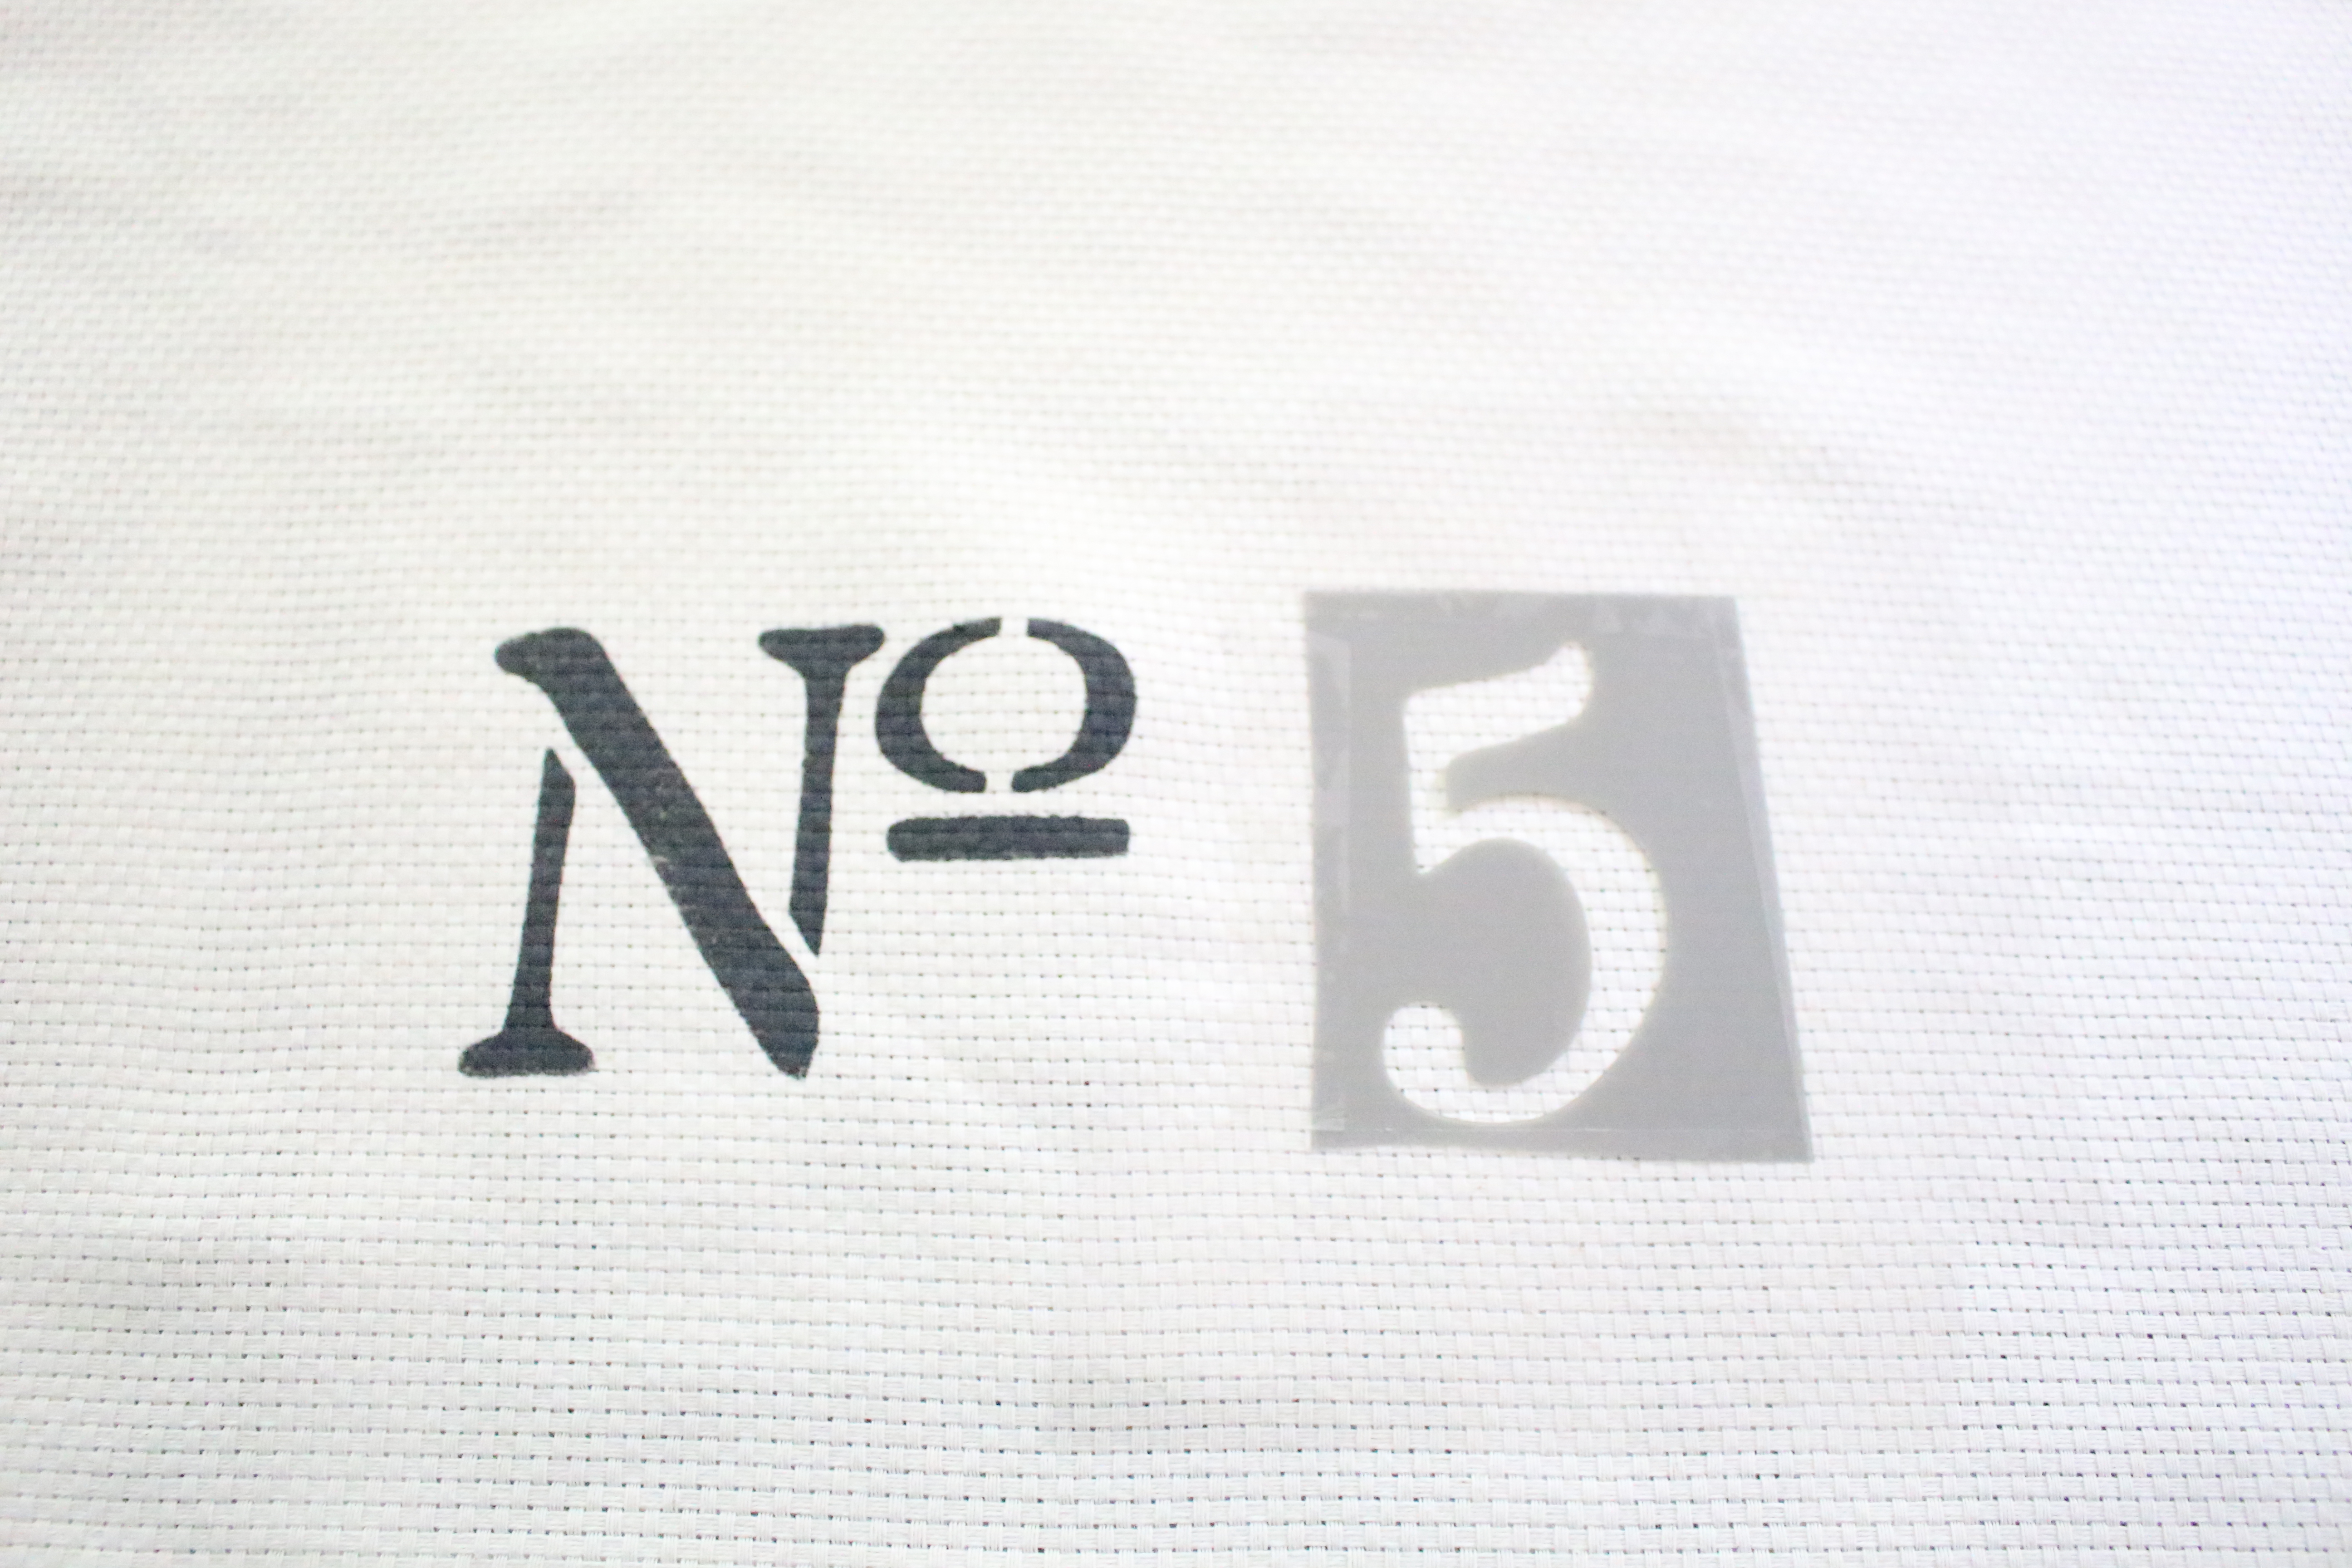 No. 5 Stencil on a Farmhouse Pillow Cover Project by www.whitecottagehomeandliving.com